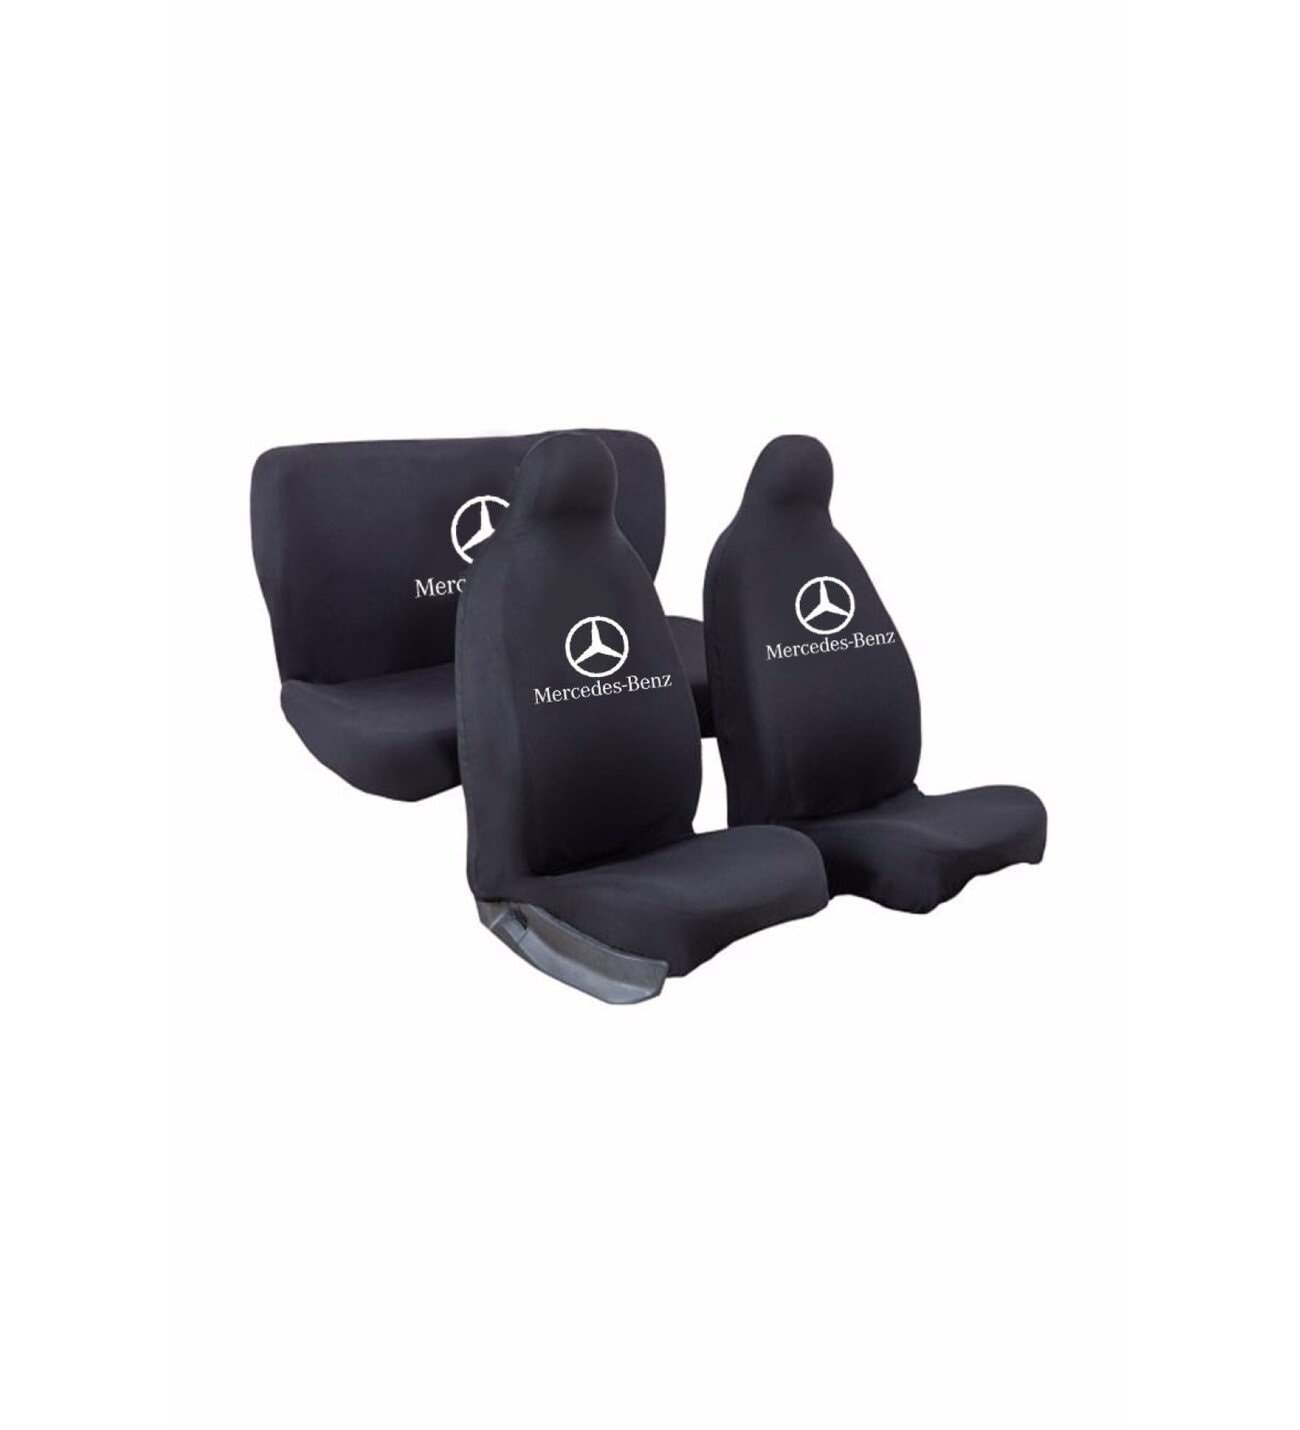 2019 Mercedes-Benz E-Class Vehicle Seat Covers & Car Seat Protectors for  Pets